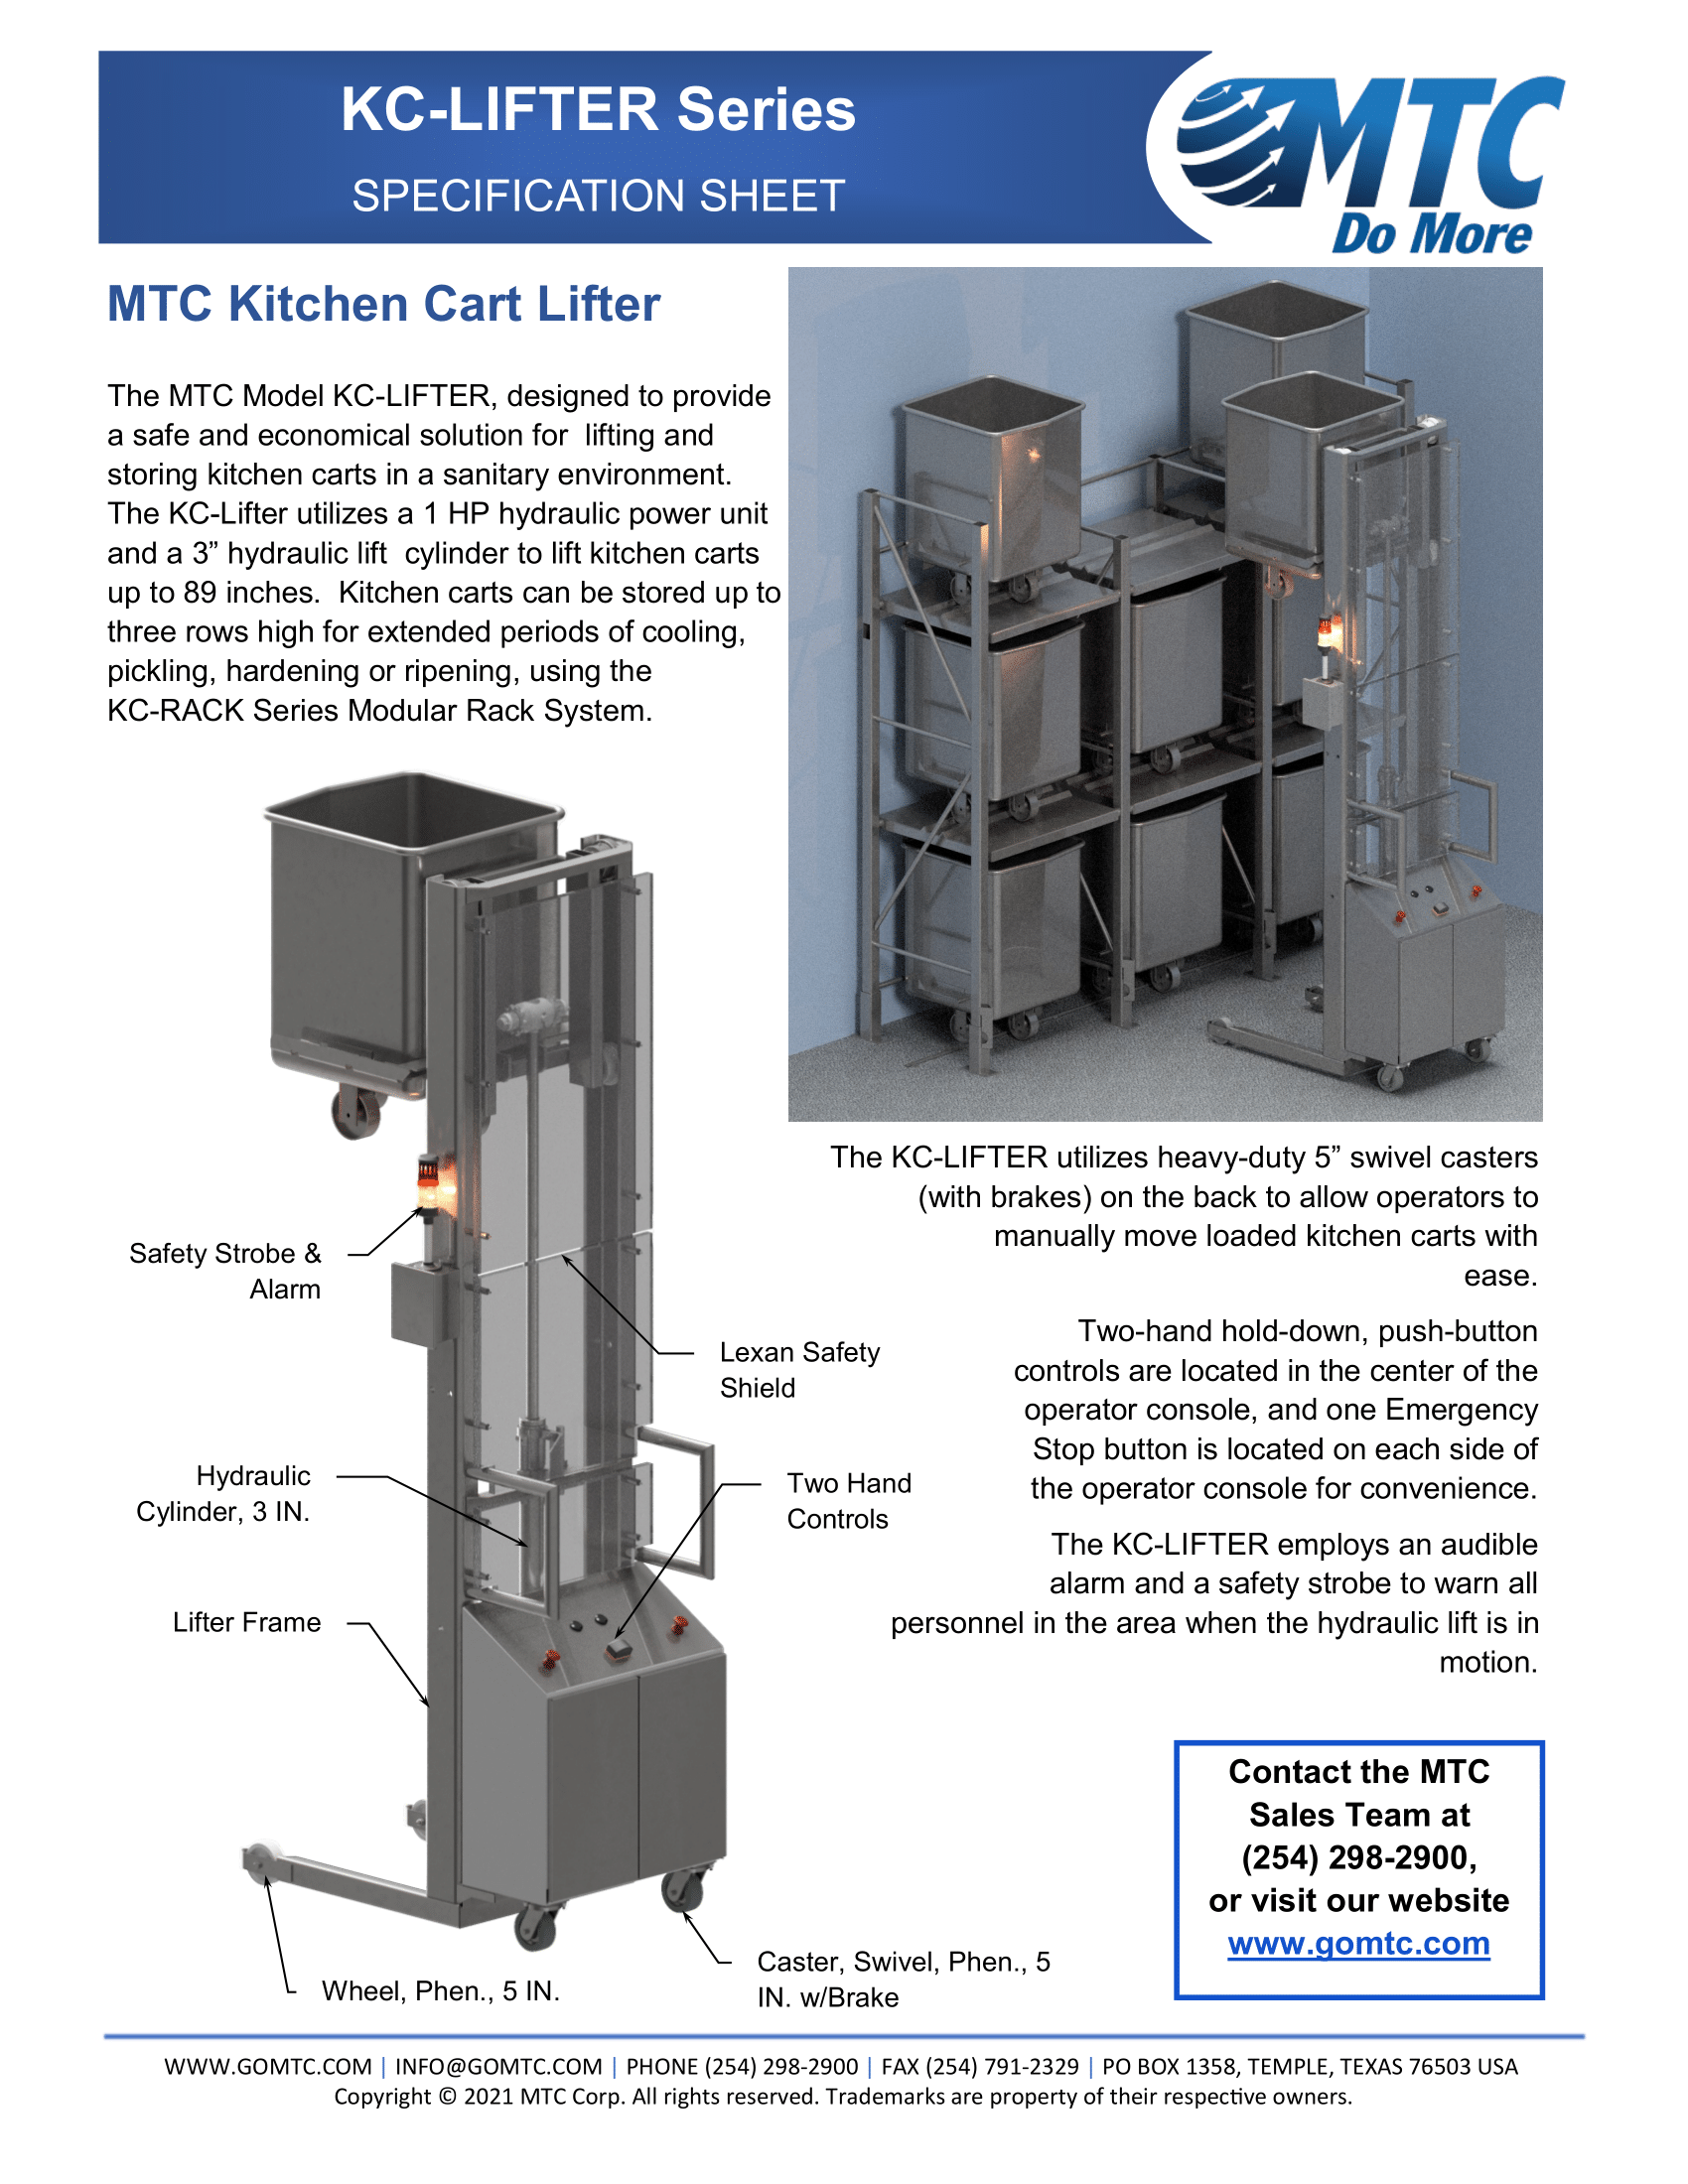 MTC Brochure for the Kitchen Cart lifter - front cover